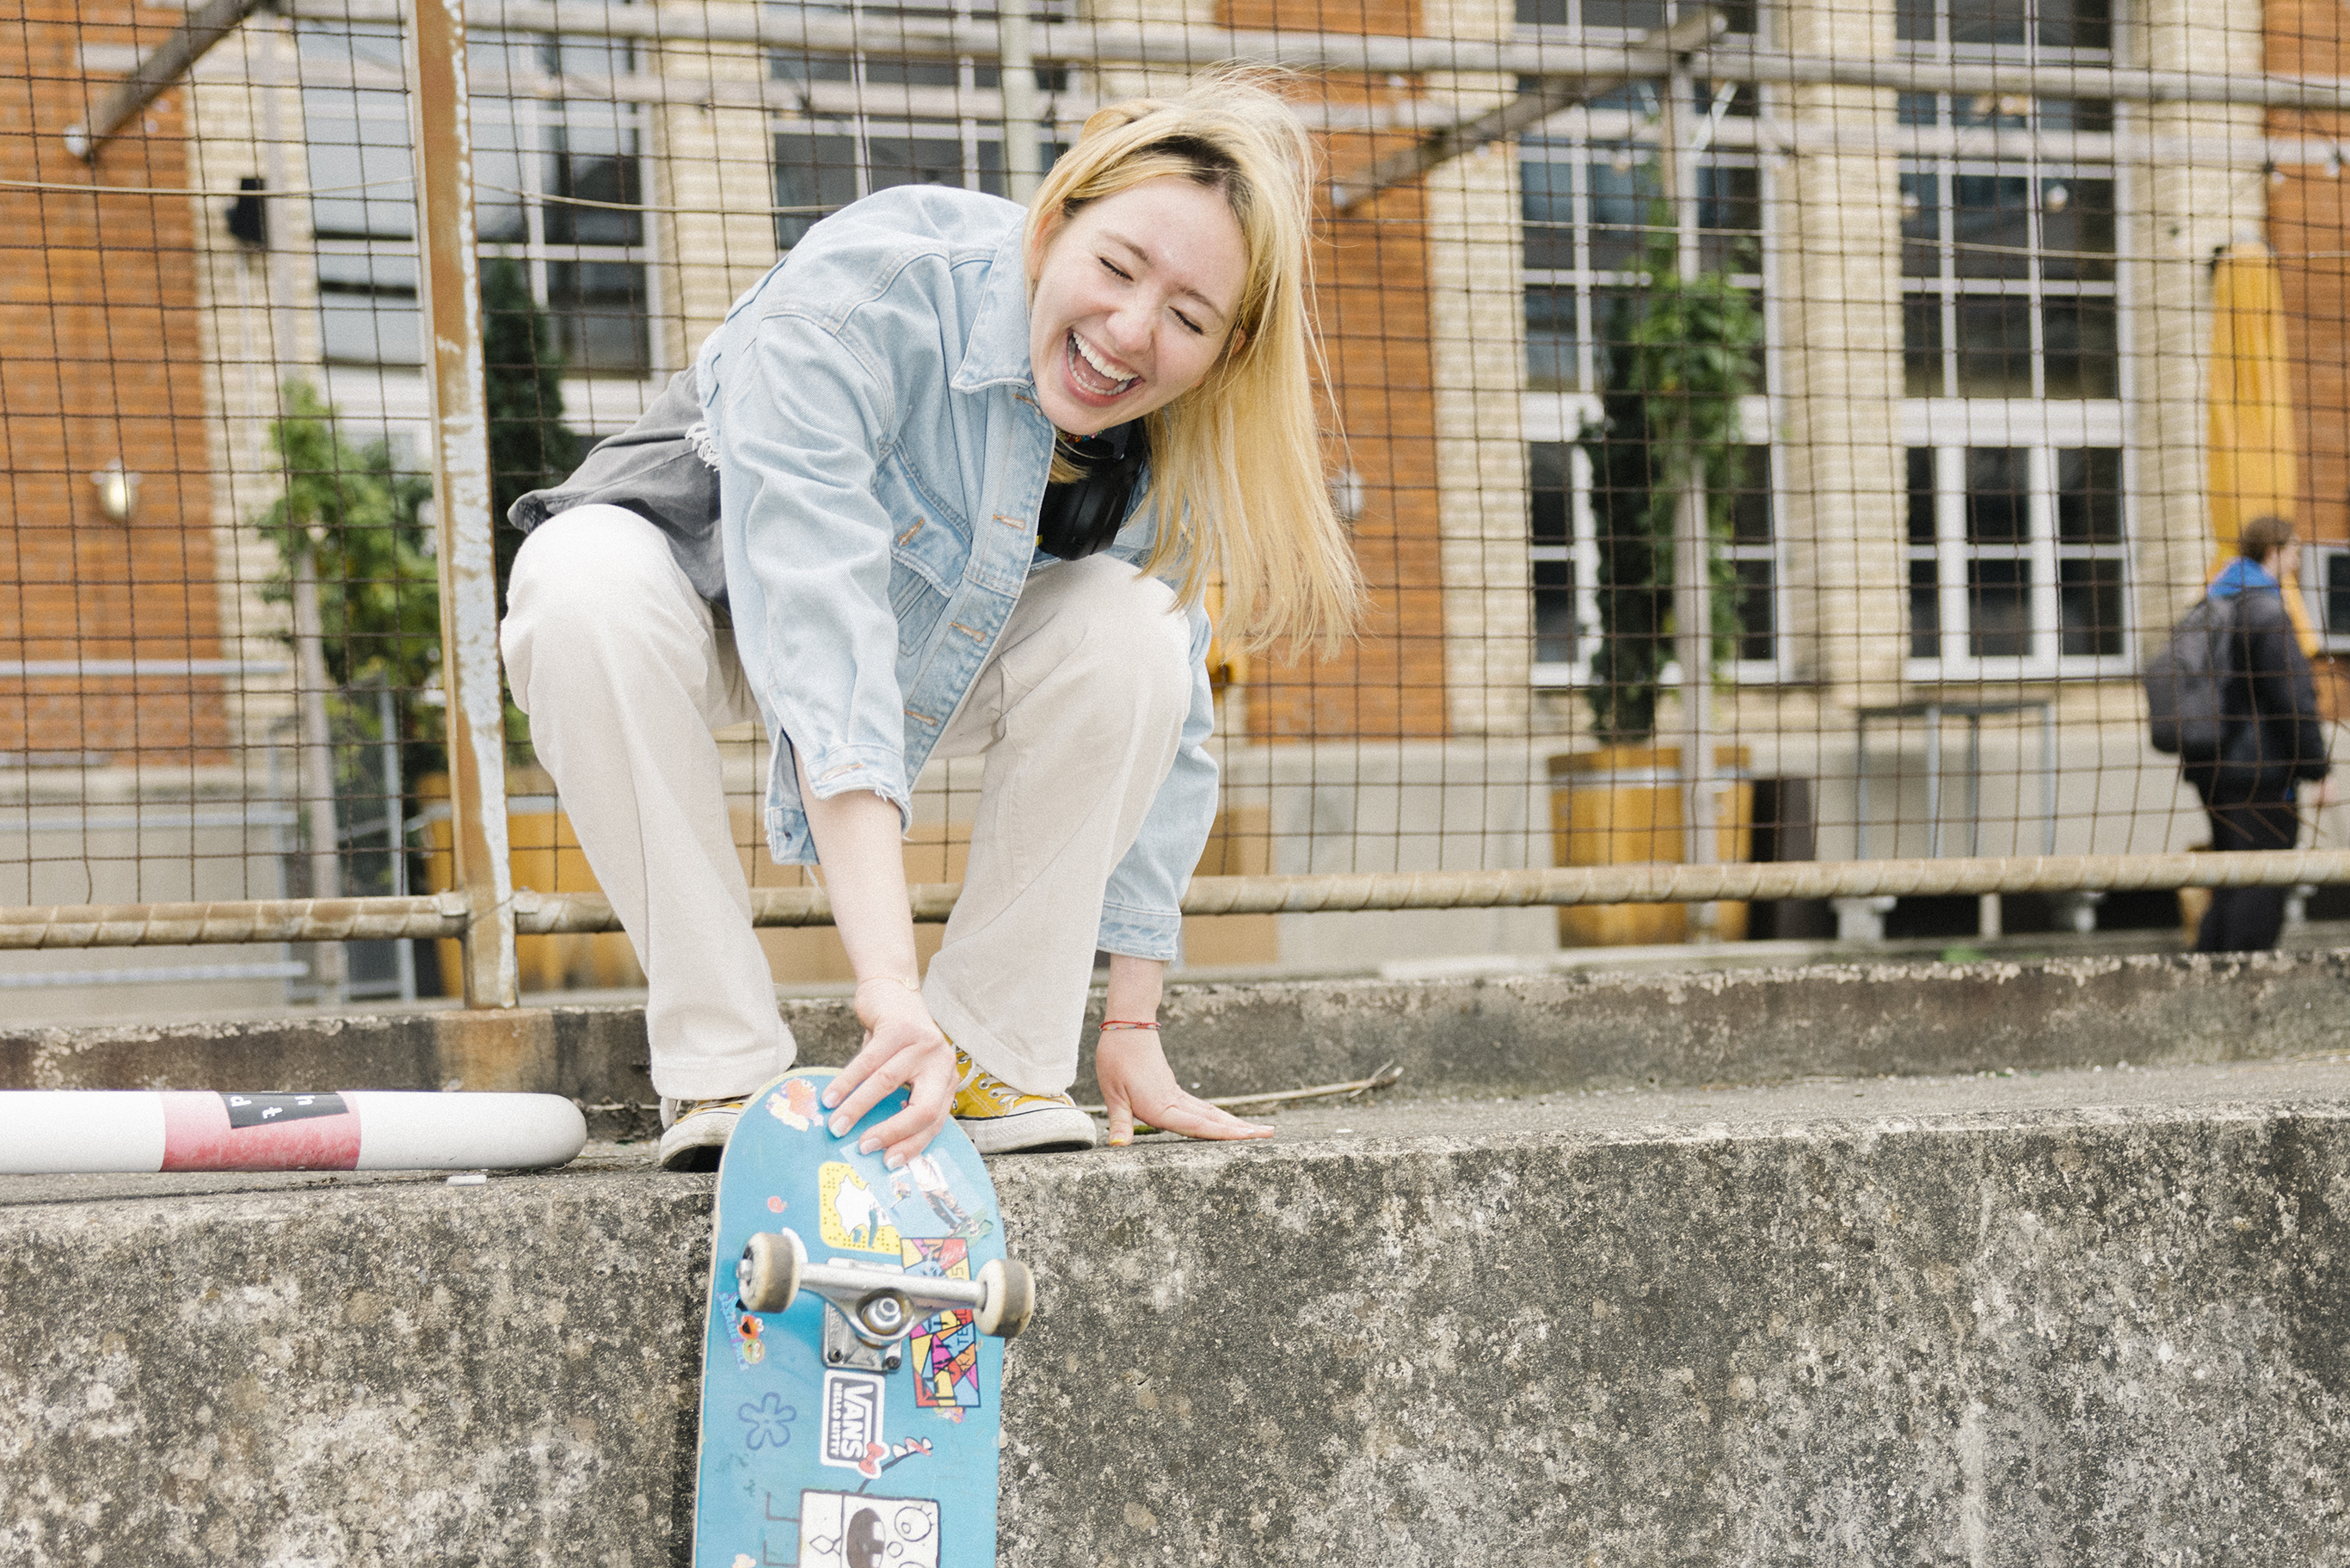 A young woman squats laughing on a wall holding her skateboard.